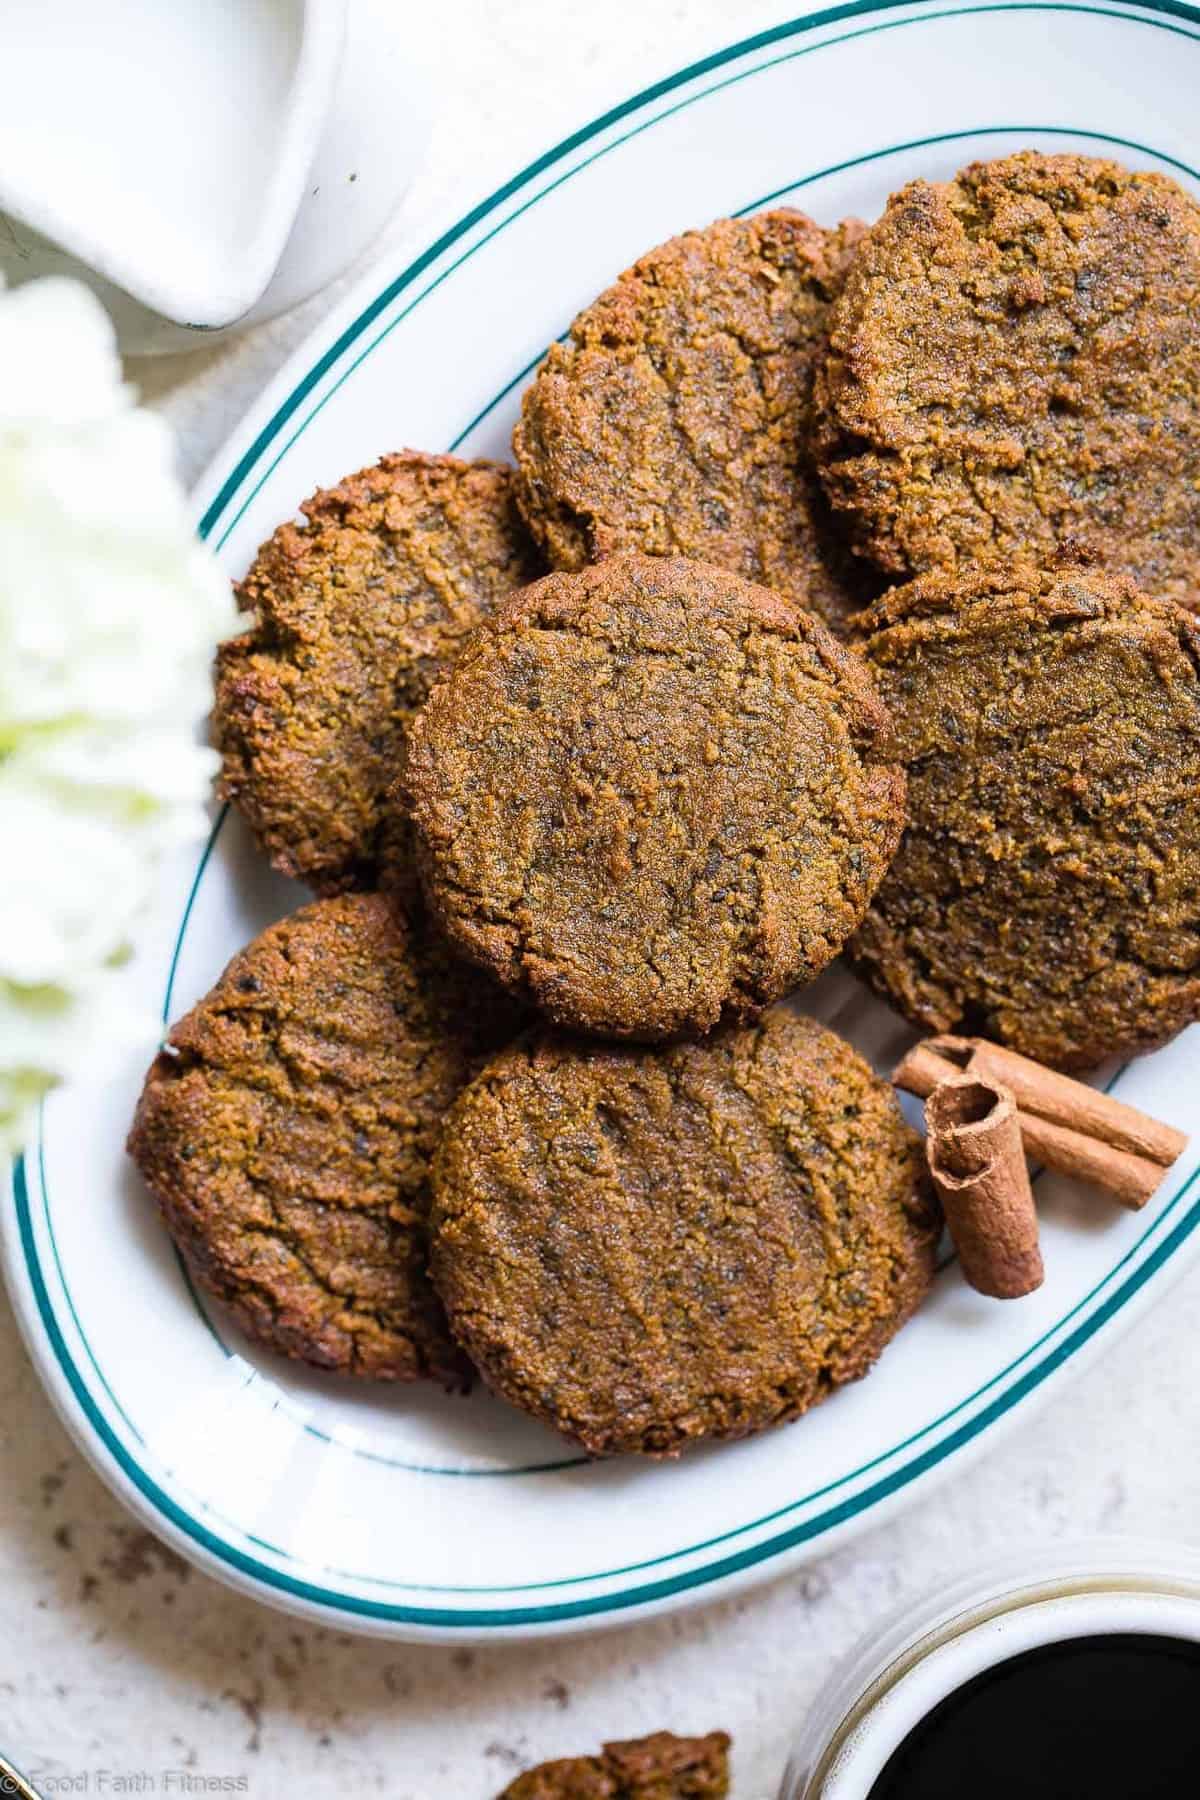 Hidden Veggie Paleo Breakfast Cookies - These Paleo Breakfast Cookies are made in the food processor for a quick, easy and healthy breakfast!  Gluten/grain/dairy/egg free, vegan friendly and DELICIOUS! Even picky kiddos won't taste the hidden veggies! | #Foodfaithfitness | #Glutenfree #Paleo #Vegan #Dairyfree #EggFree